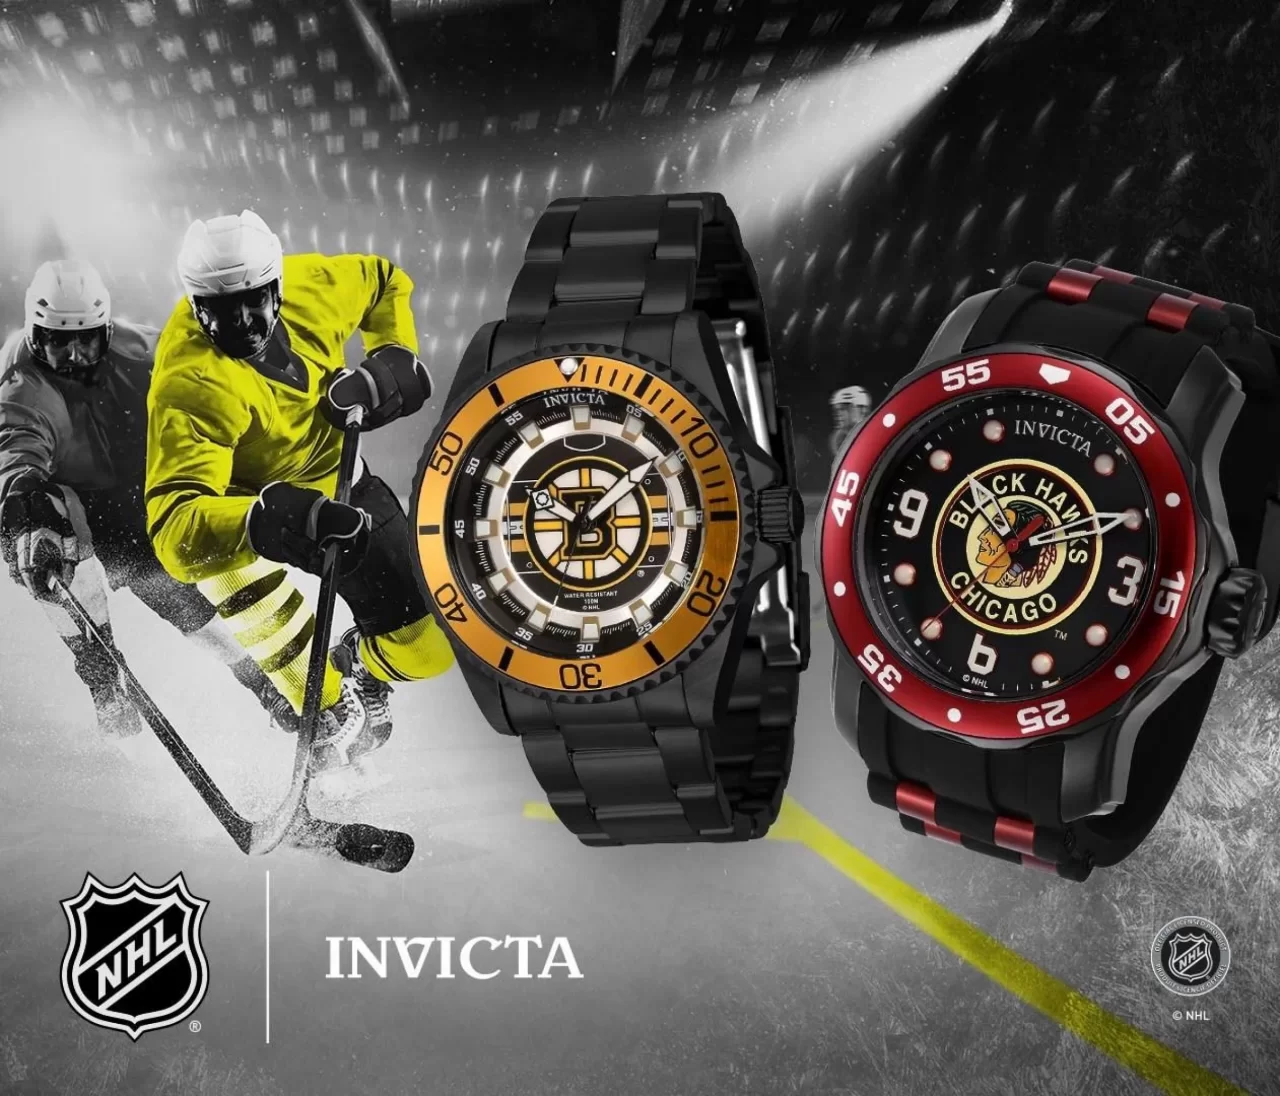 Invicta Shoots & Scores - Invicta Watch Group Launches National Hockey League Collection